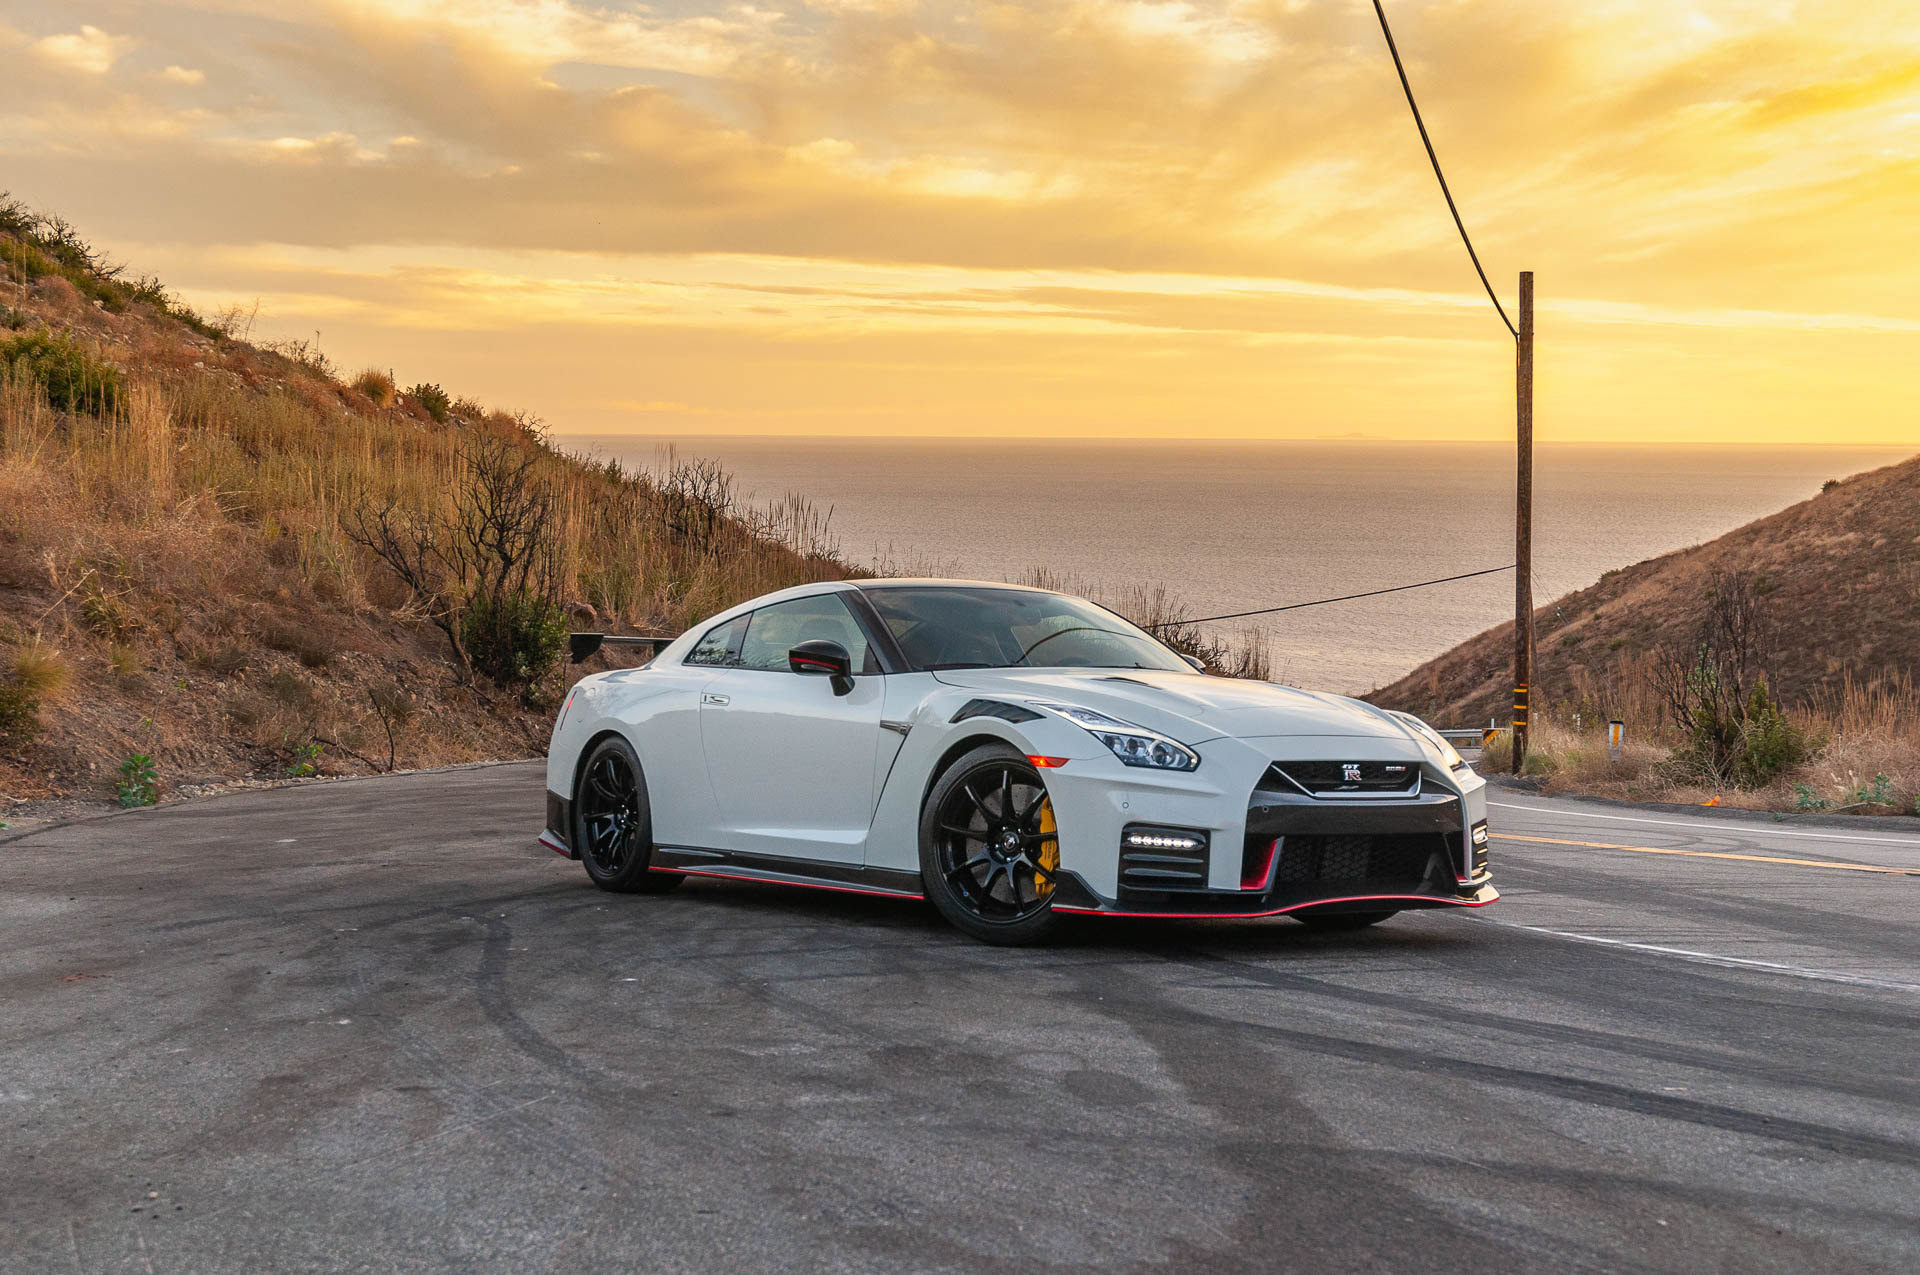 Here are the 5 things we know about the new R36 Nissan GT-R. – GT